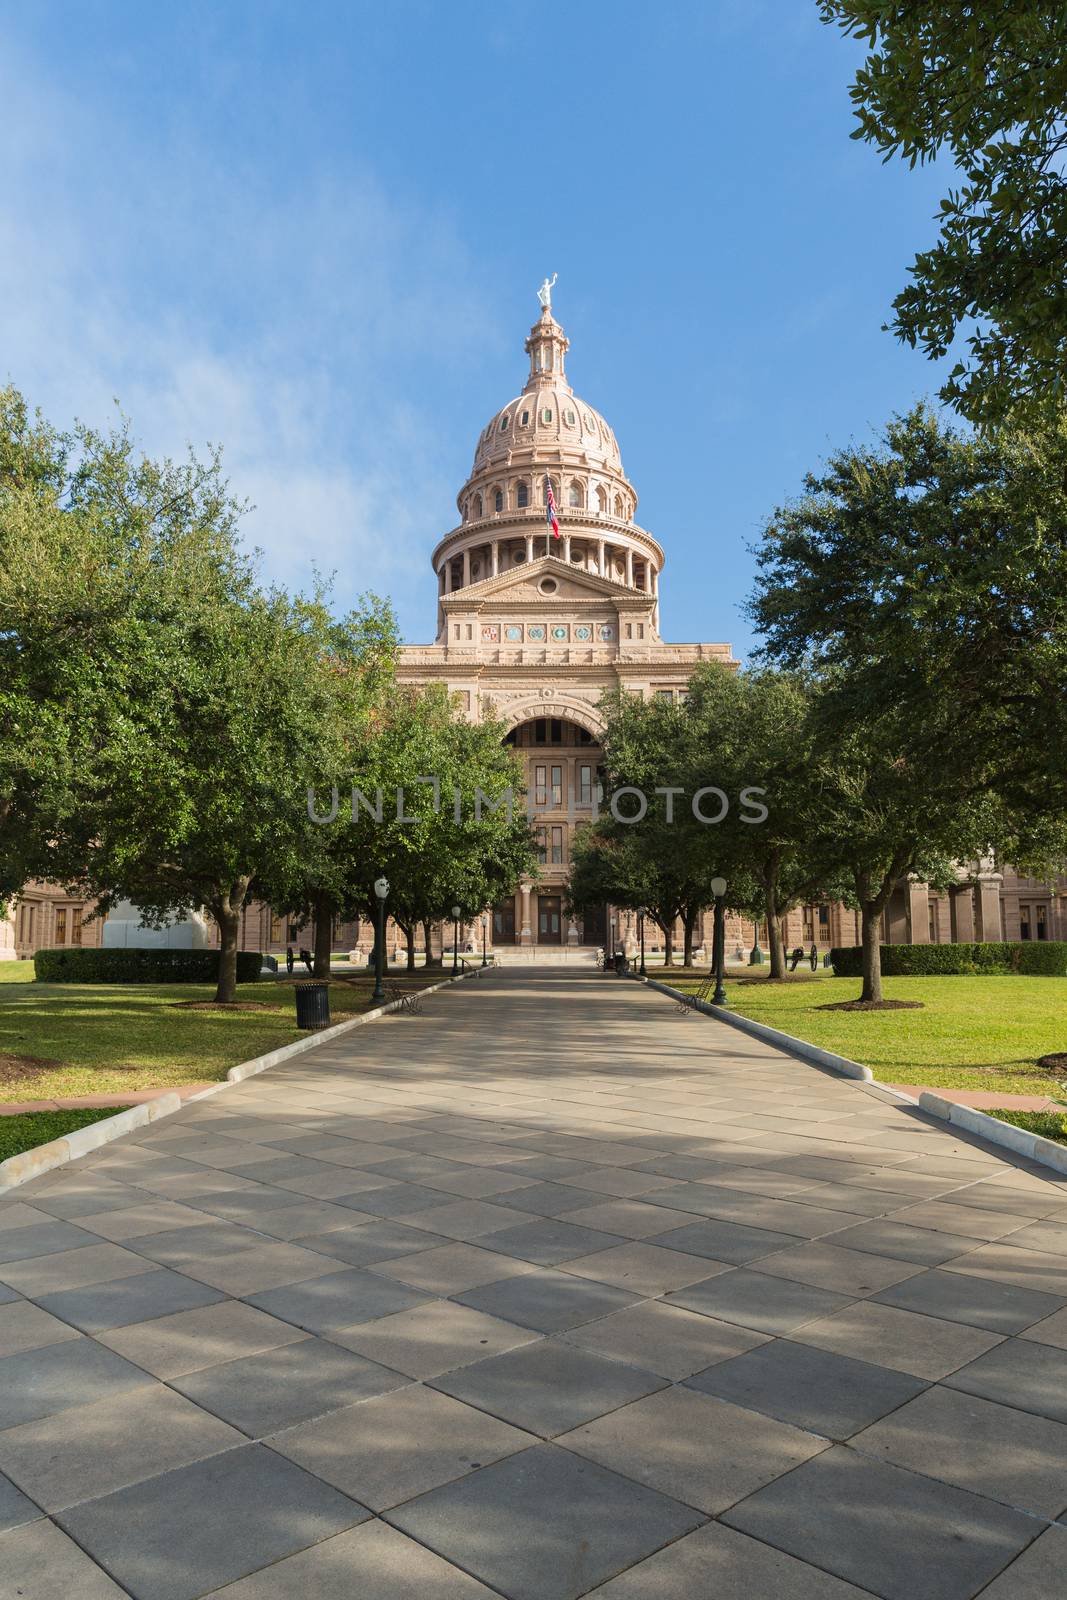 The amazing Capitol Building in Austin Texas